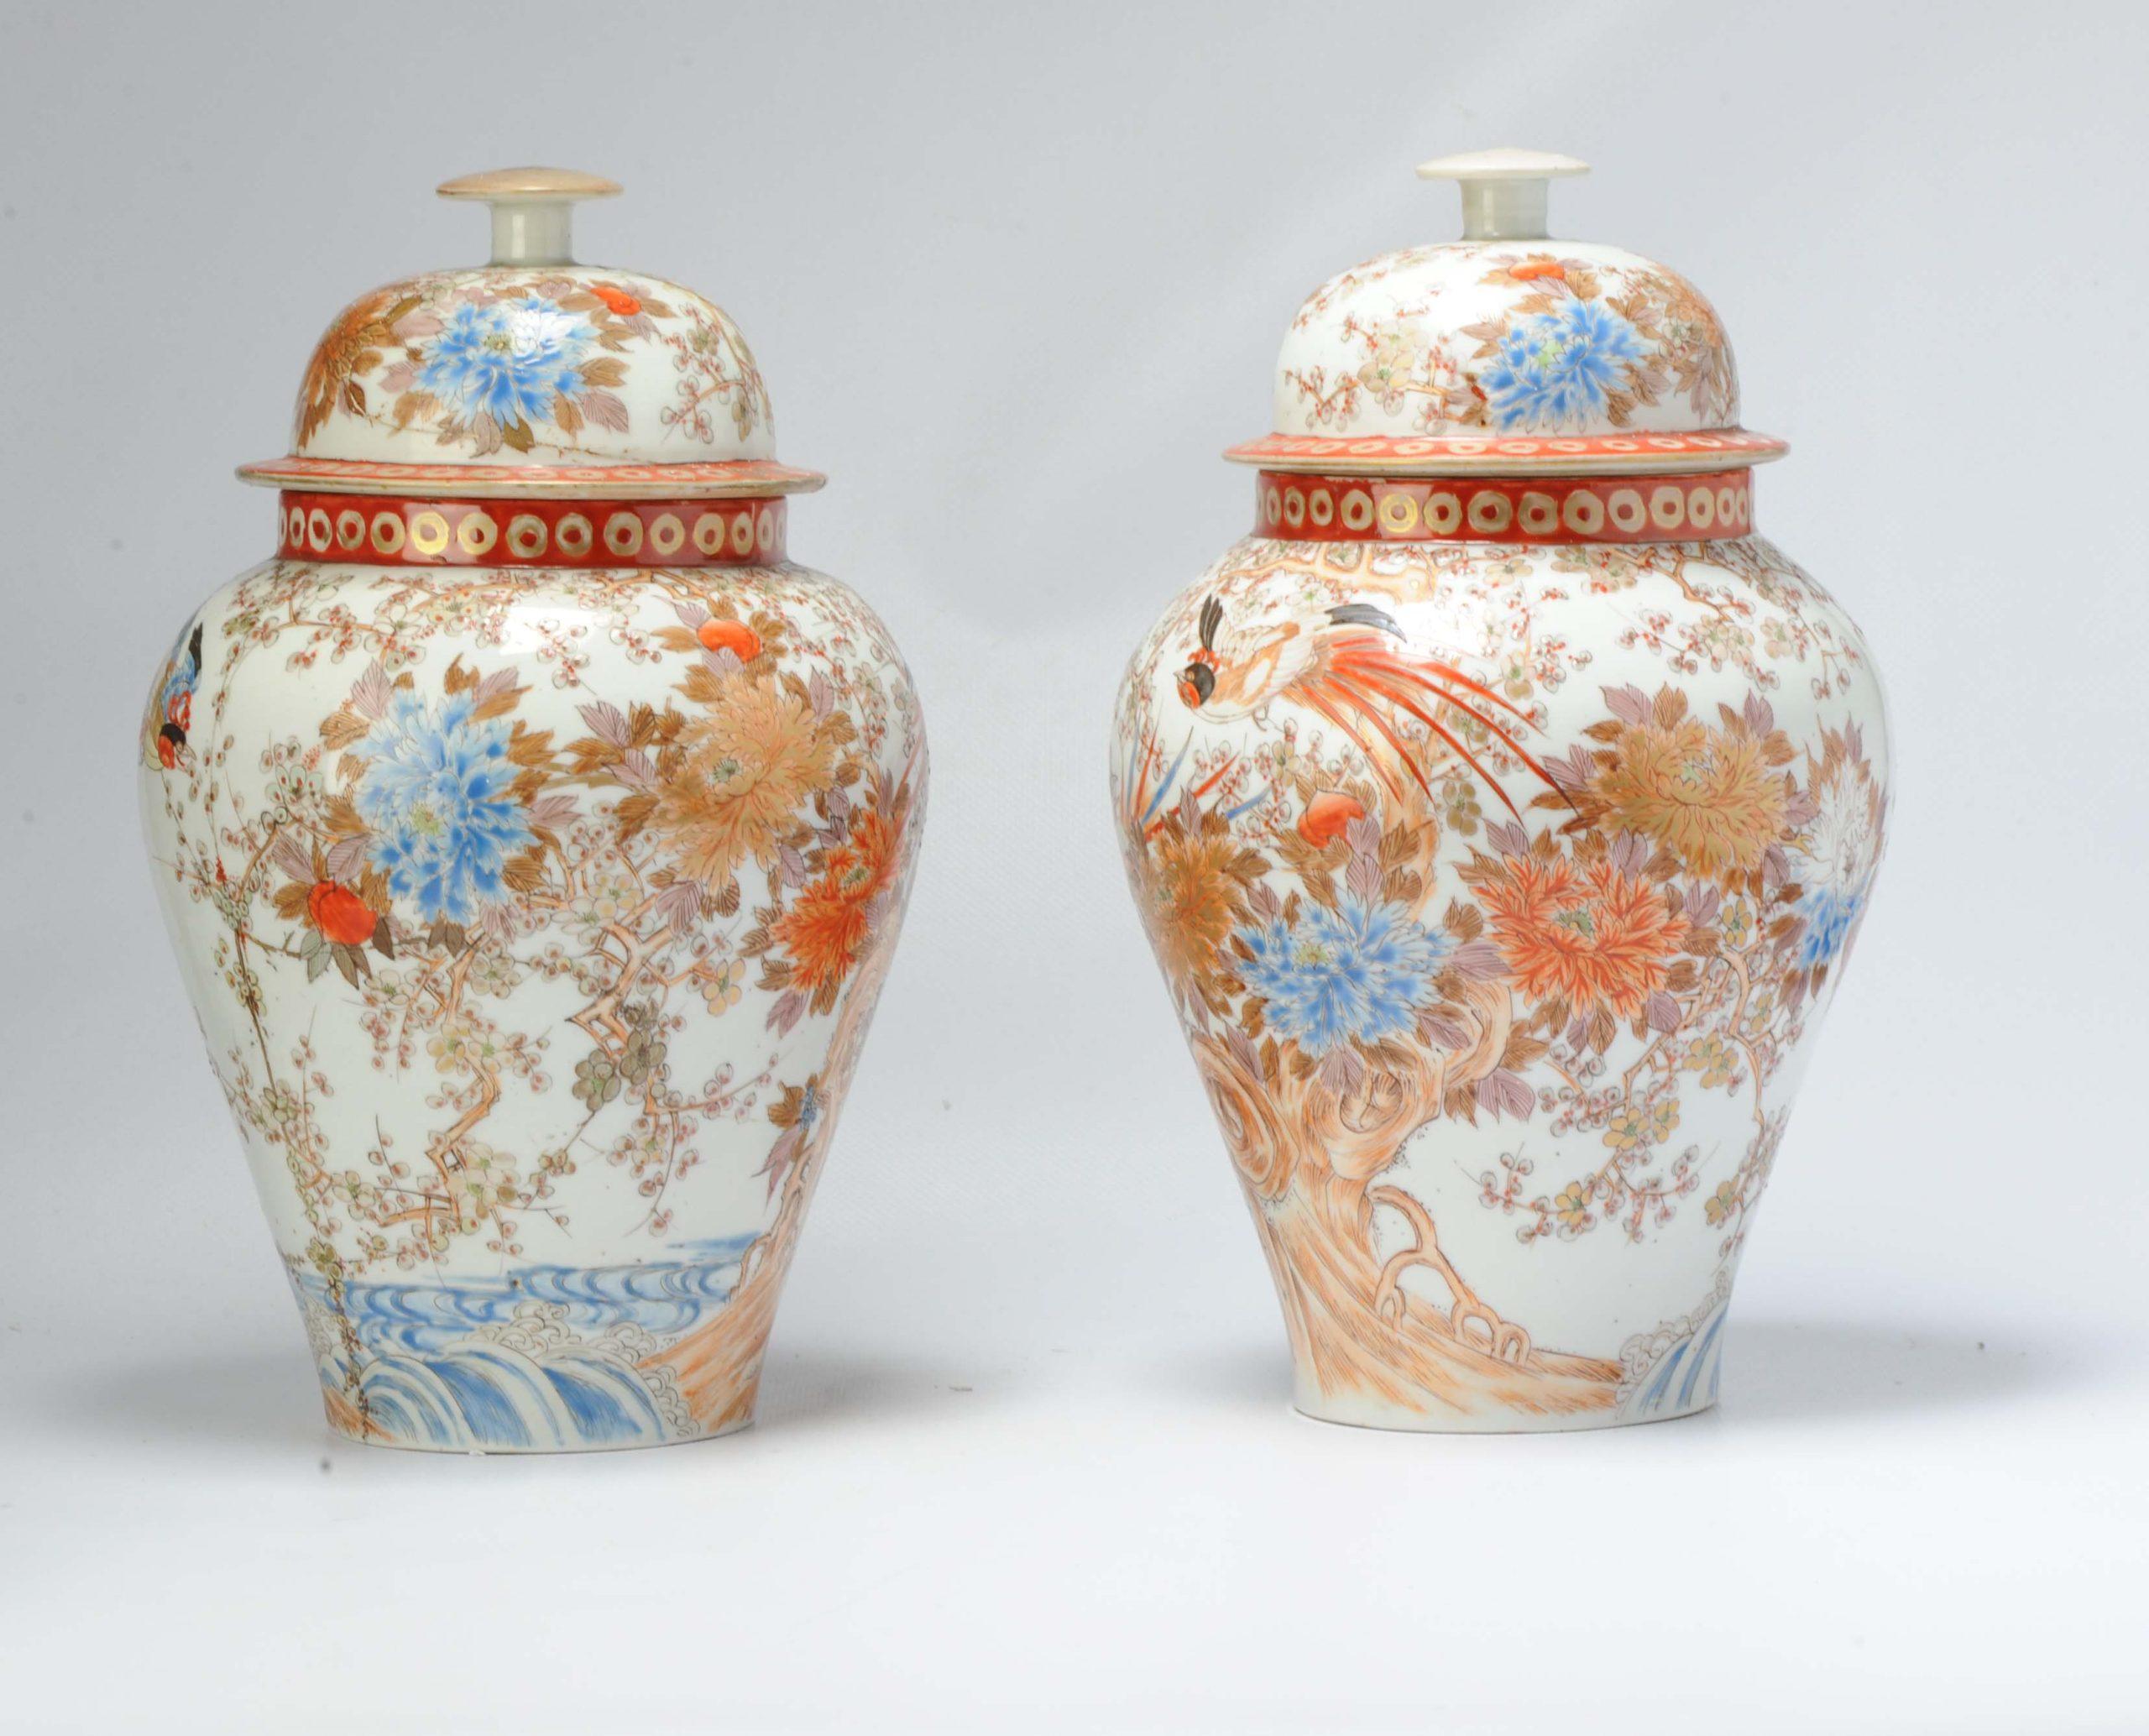 Superb quality Hichozan, These nice lidded vase with ongoing scene of birds in a floral garden landscape.

Marked at the base.

Additional information:
Material: Porcelain & Pottery
Japanese Style: Kutani
Region of Origin: Japan
Period: 19th century